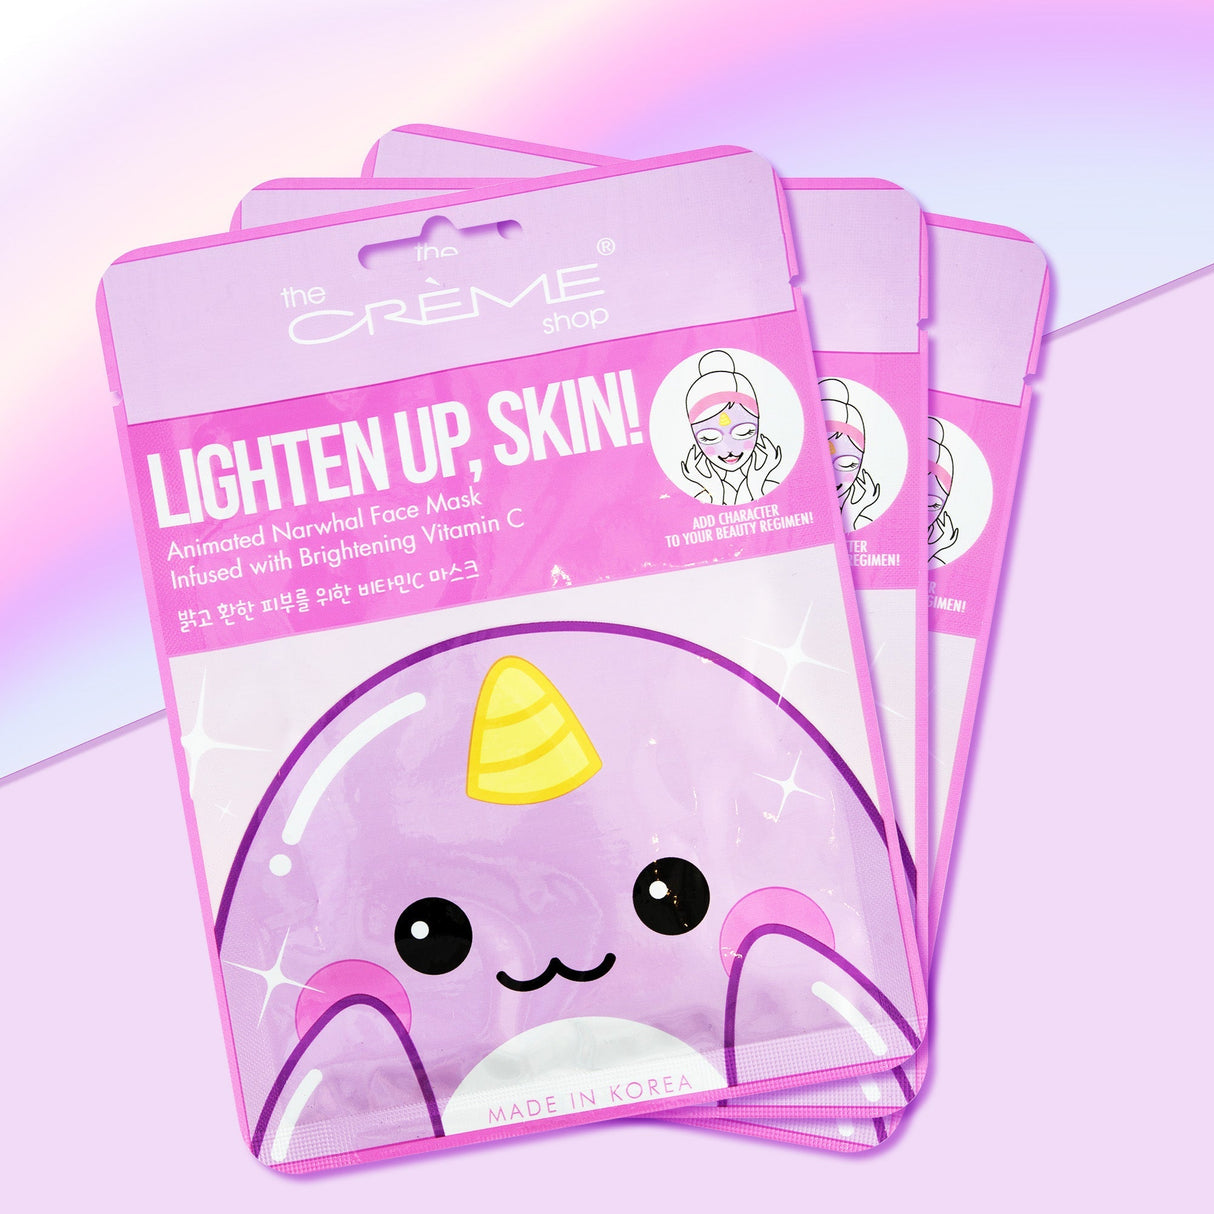 THE CREME SHOP - LIGHTEN UP, SKIN! ANIMATED NARWHAL FACE MASK (6 PC)